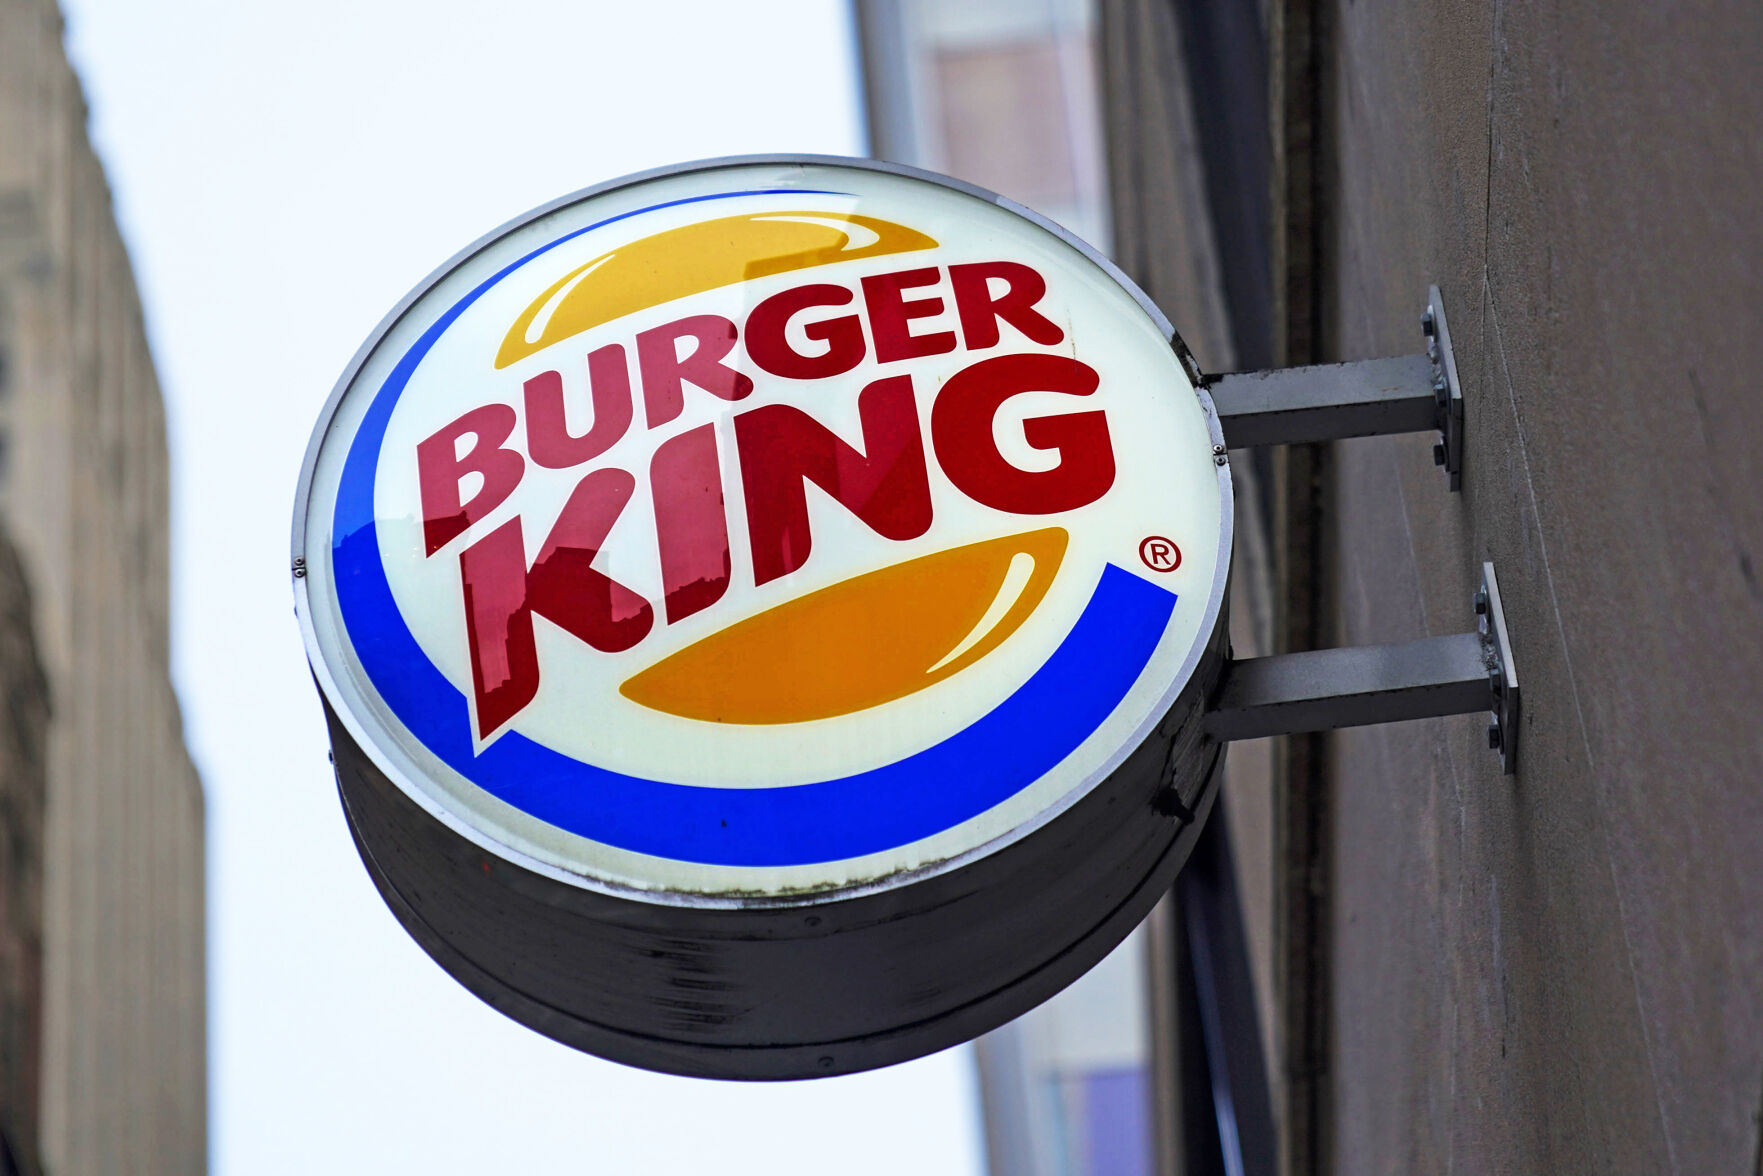 Food ads are in the crosshairs as Burger King, others face lawsuits for false advertising  newspressnow photo